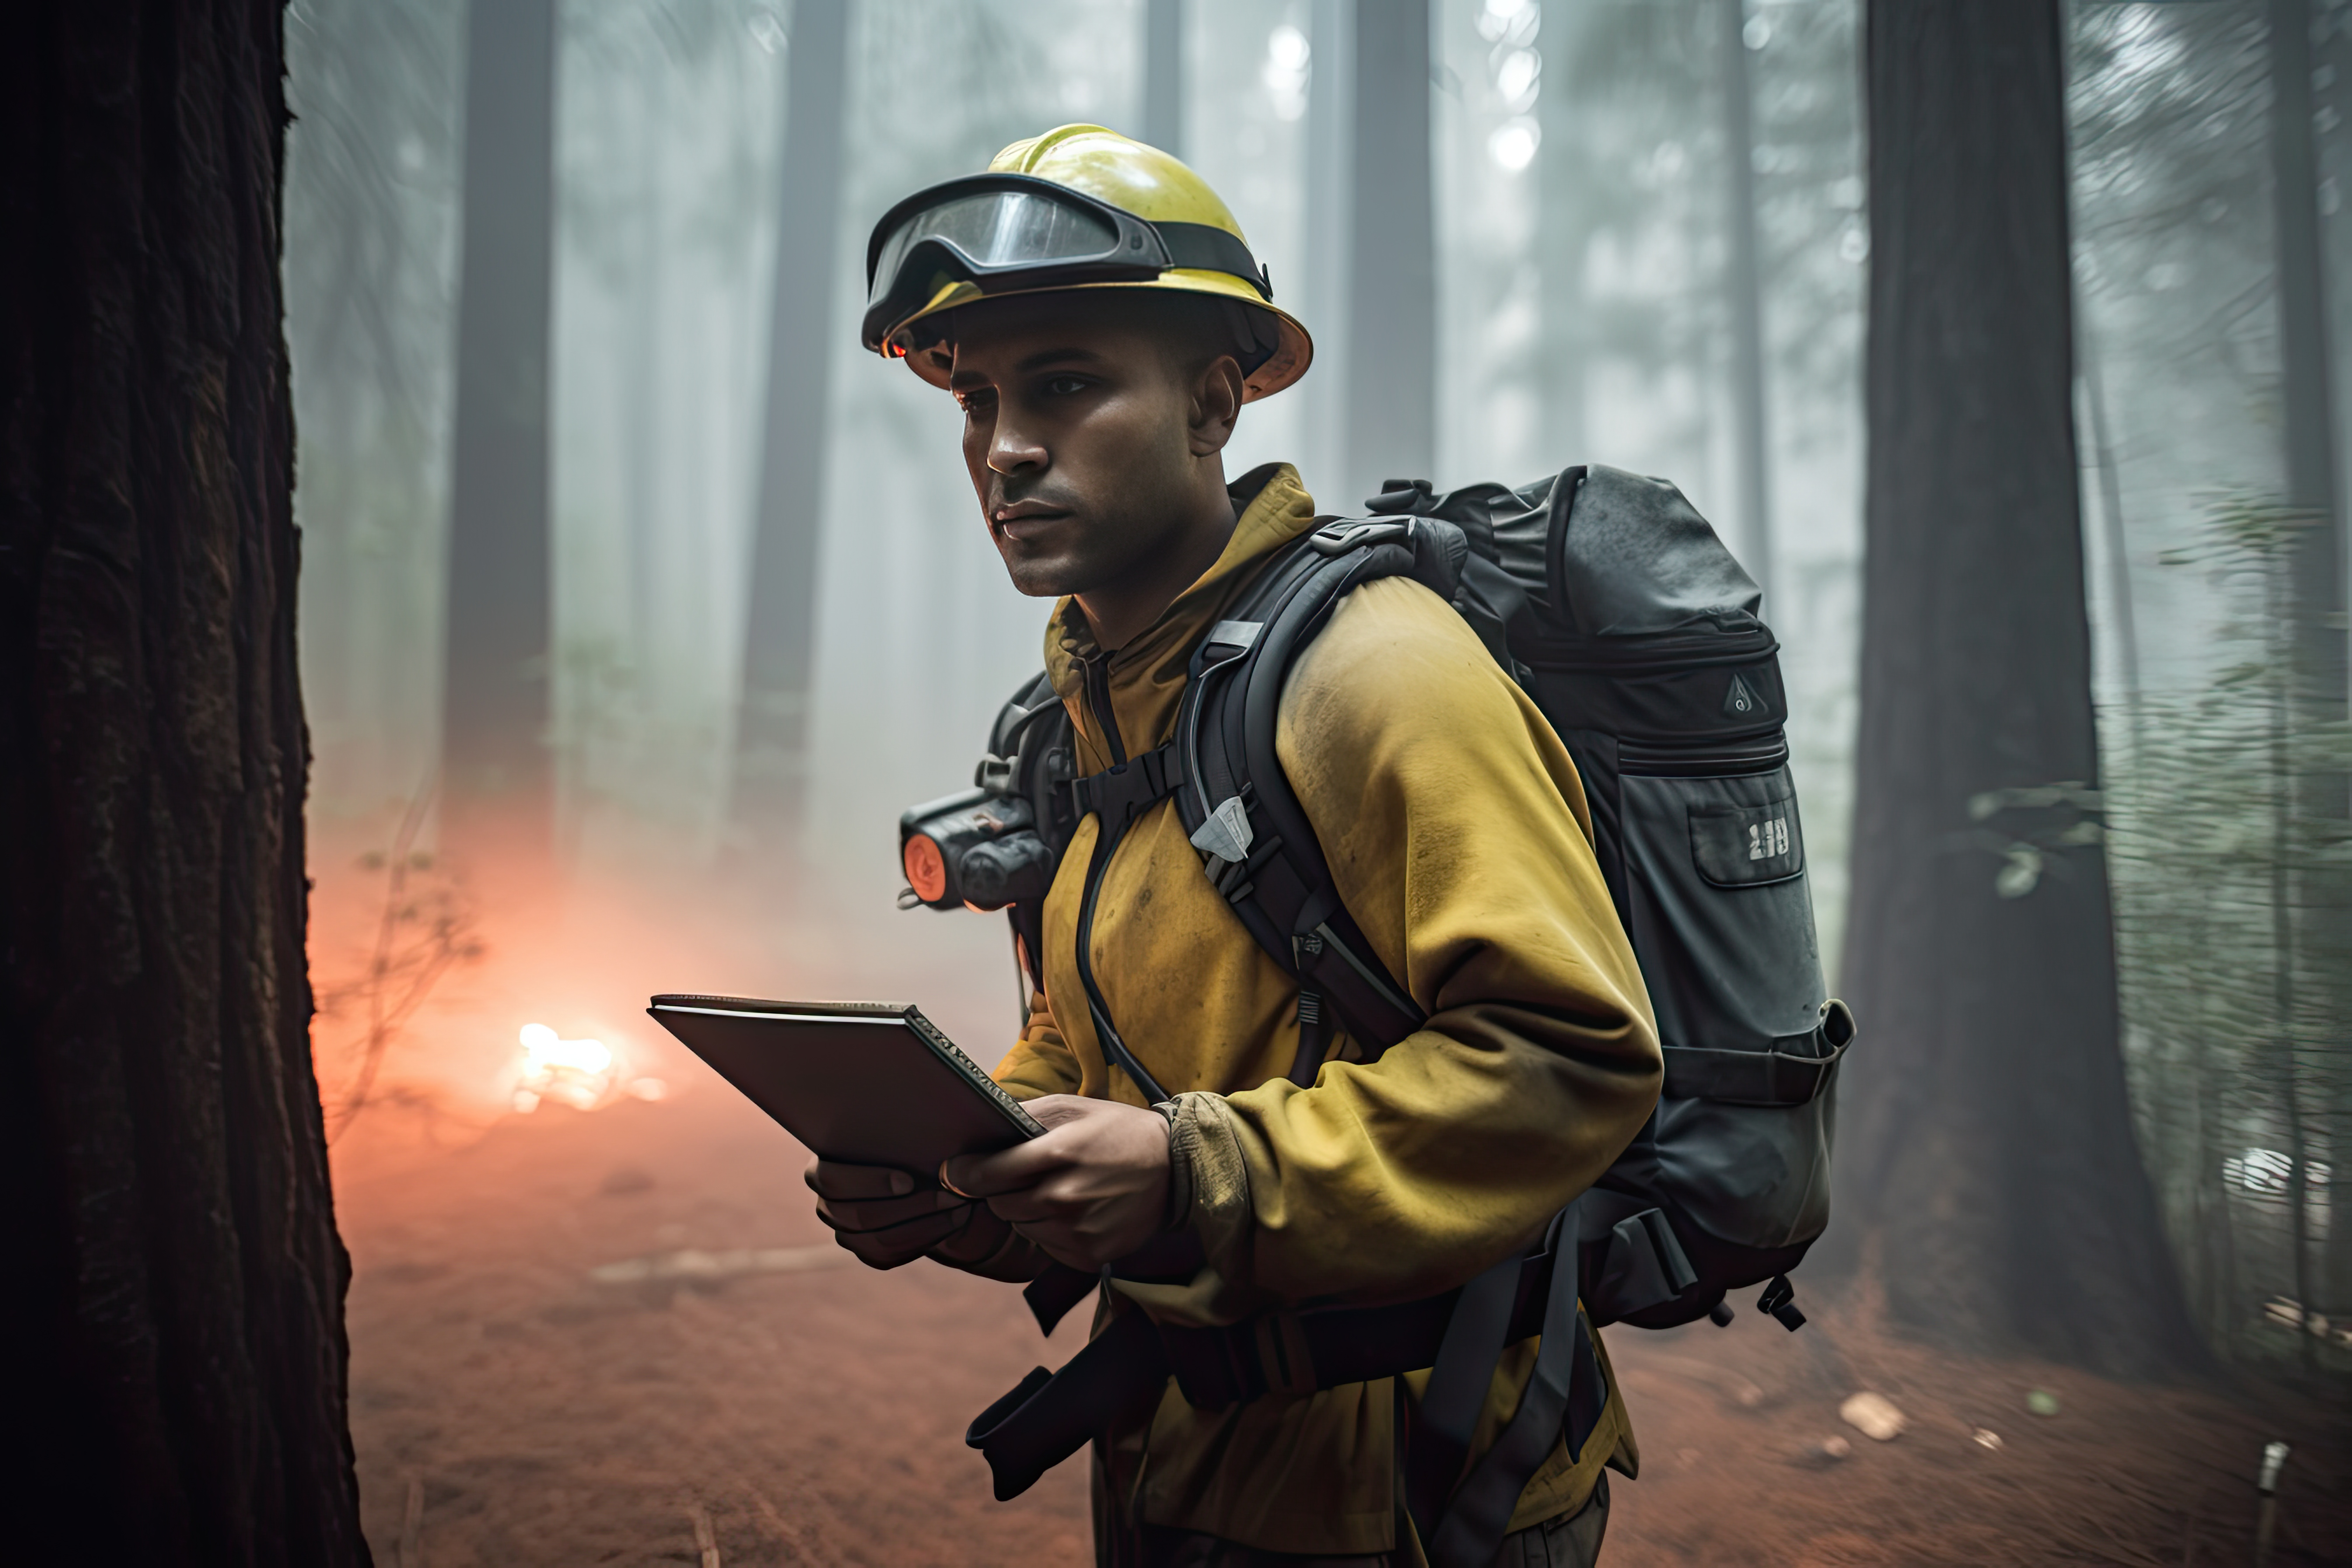 A firefighter holding a tablet amidst a foggy forest, ready to combat wildfires with advanced technology.